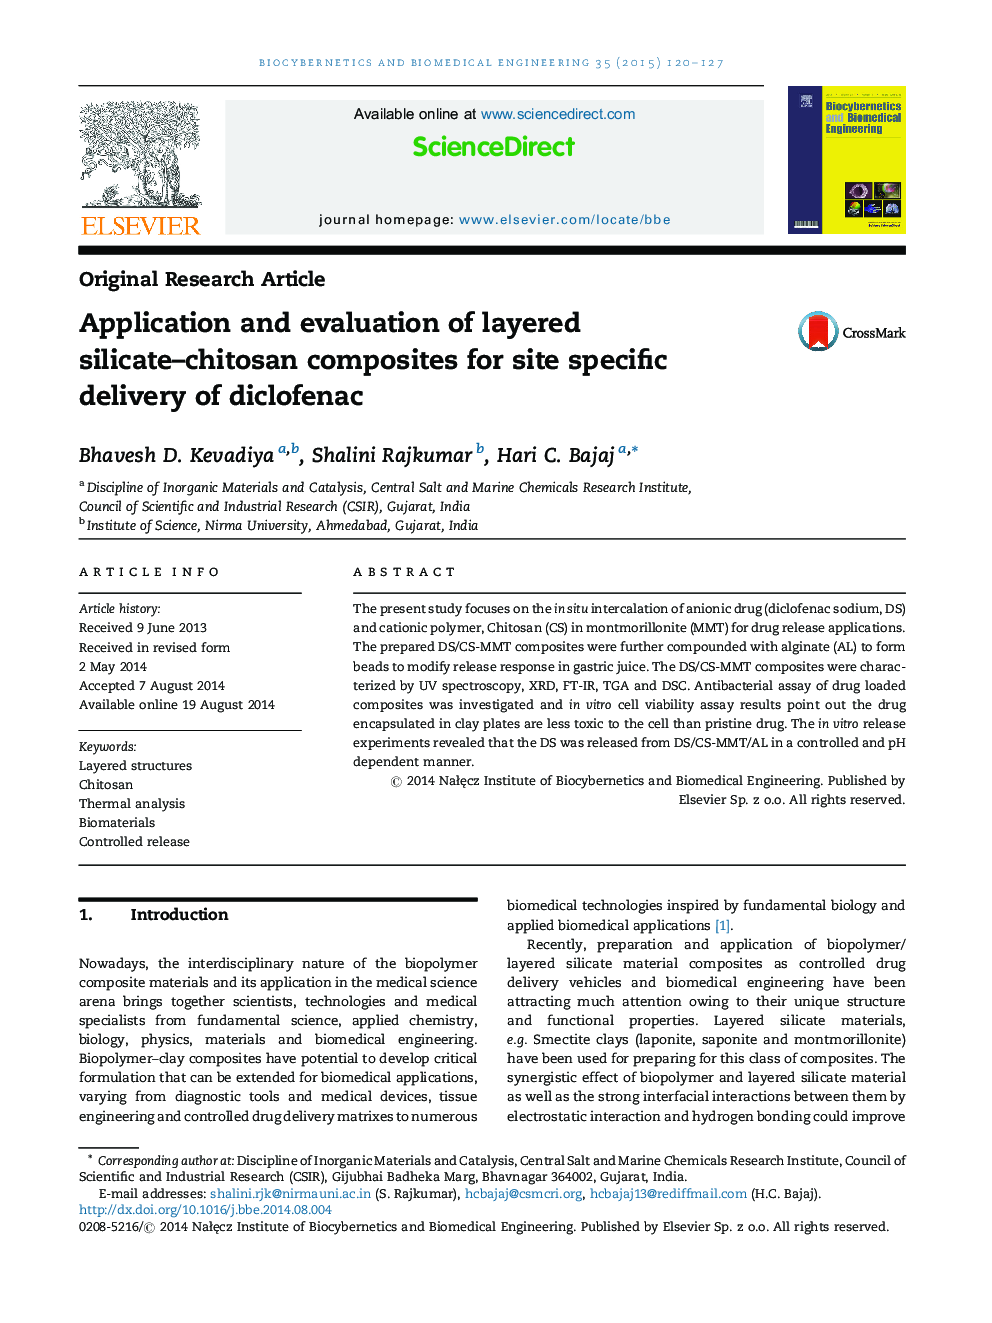 Application and evaluation of layered silicate–chitosan composites for site specific delivery of diclofenac